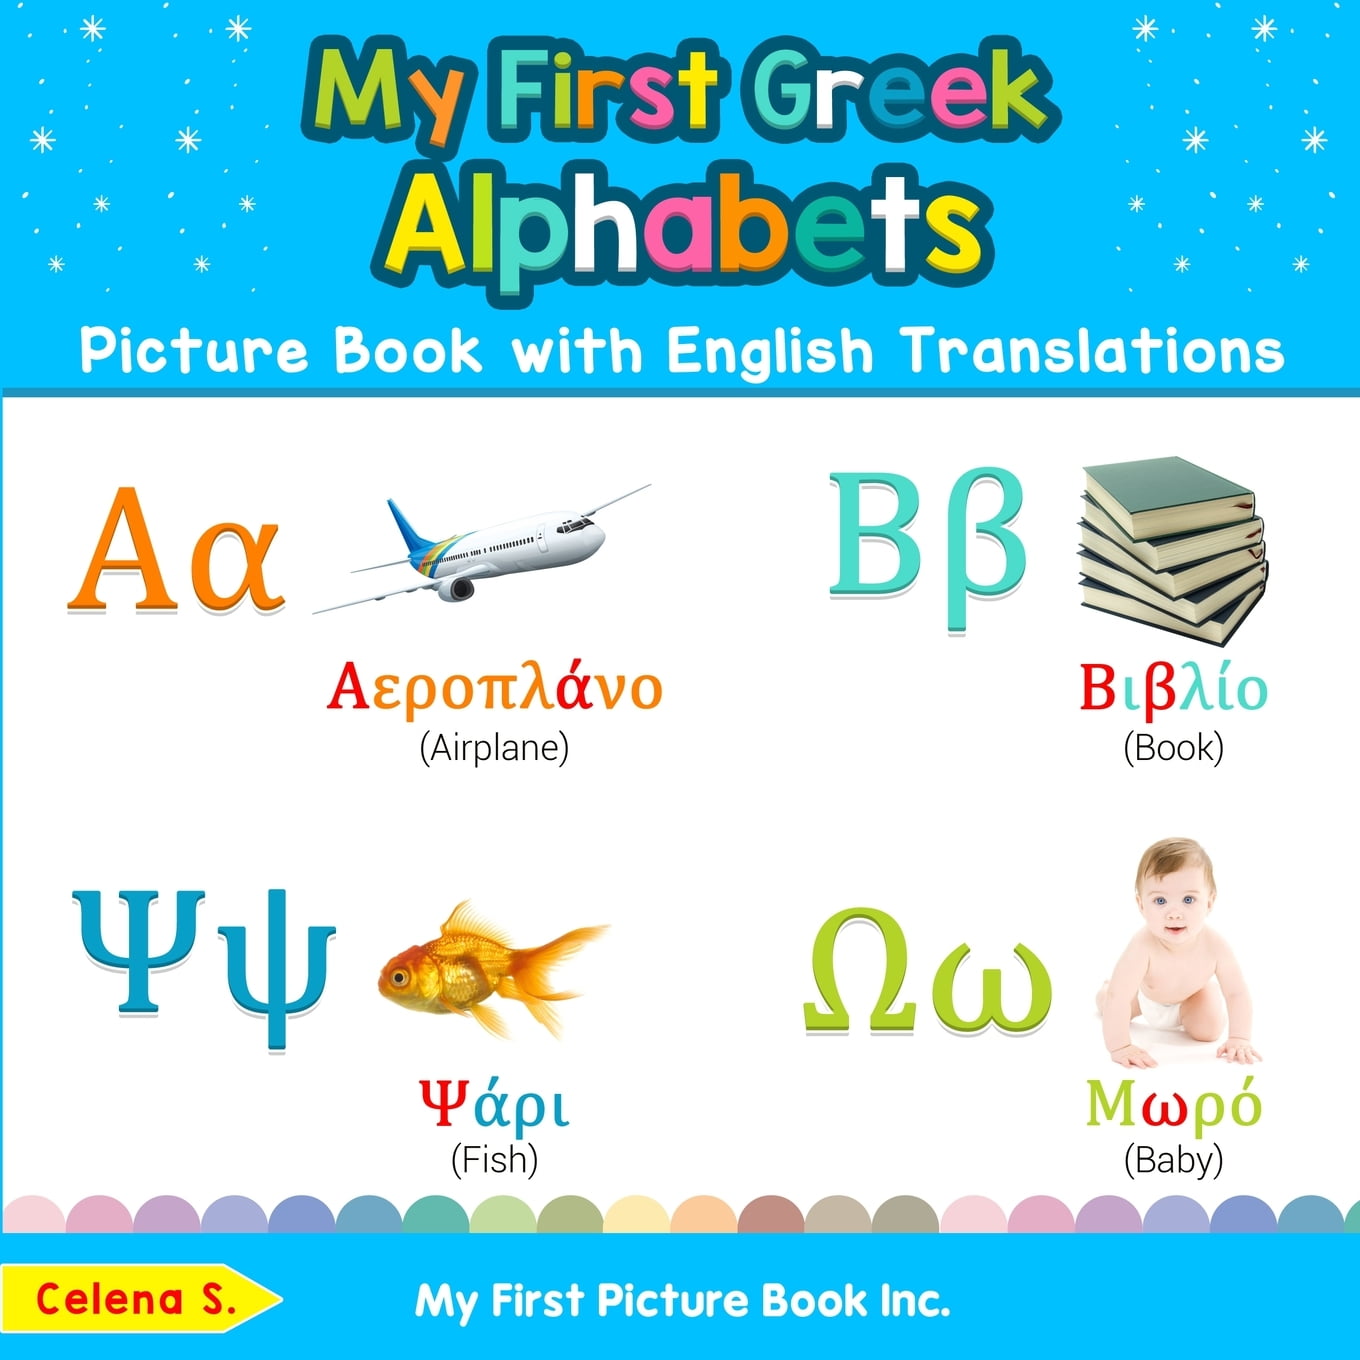 Teach Learn Basic Greek Words For Children My First Greek Alphabets Picture Book With English